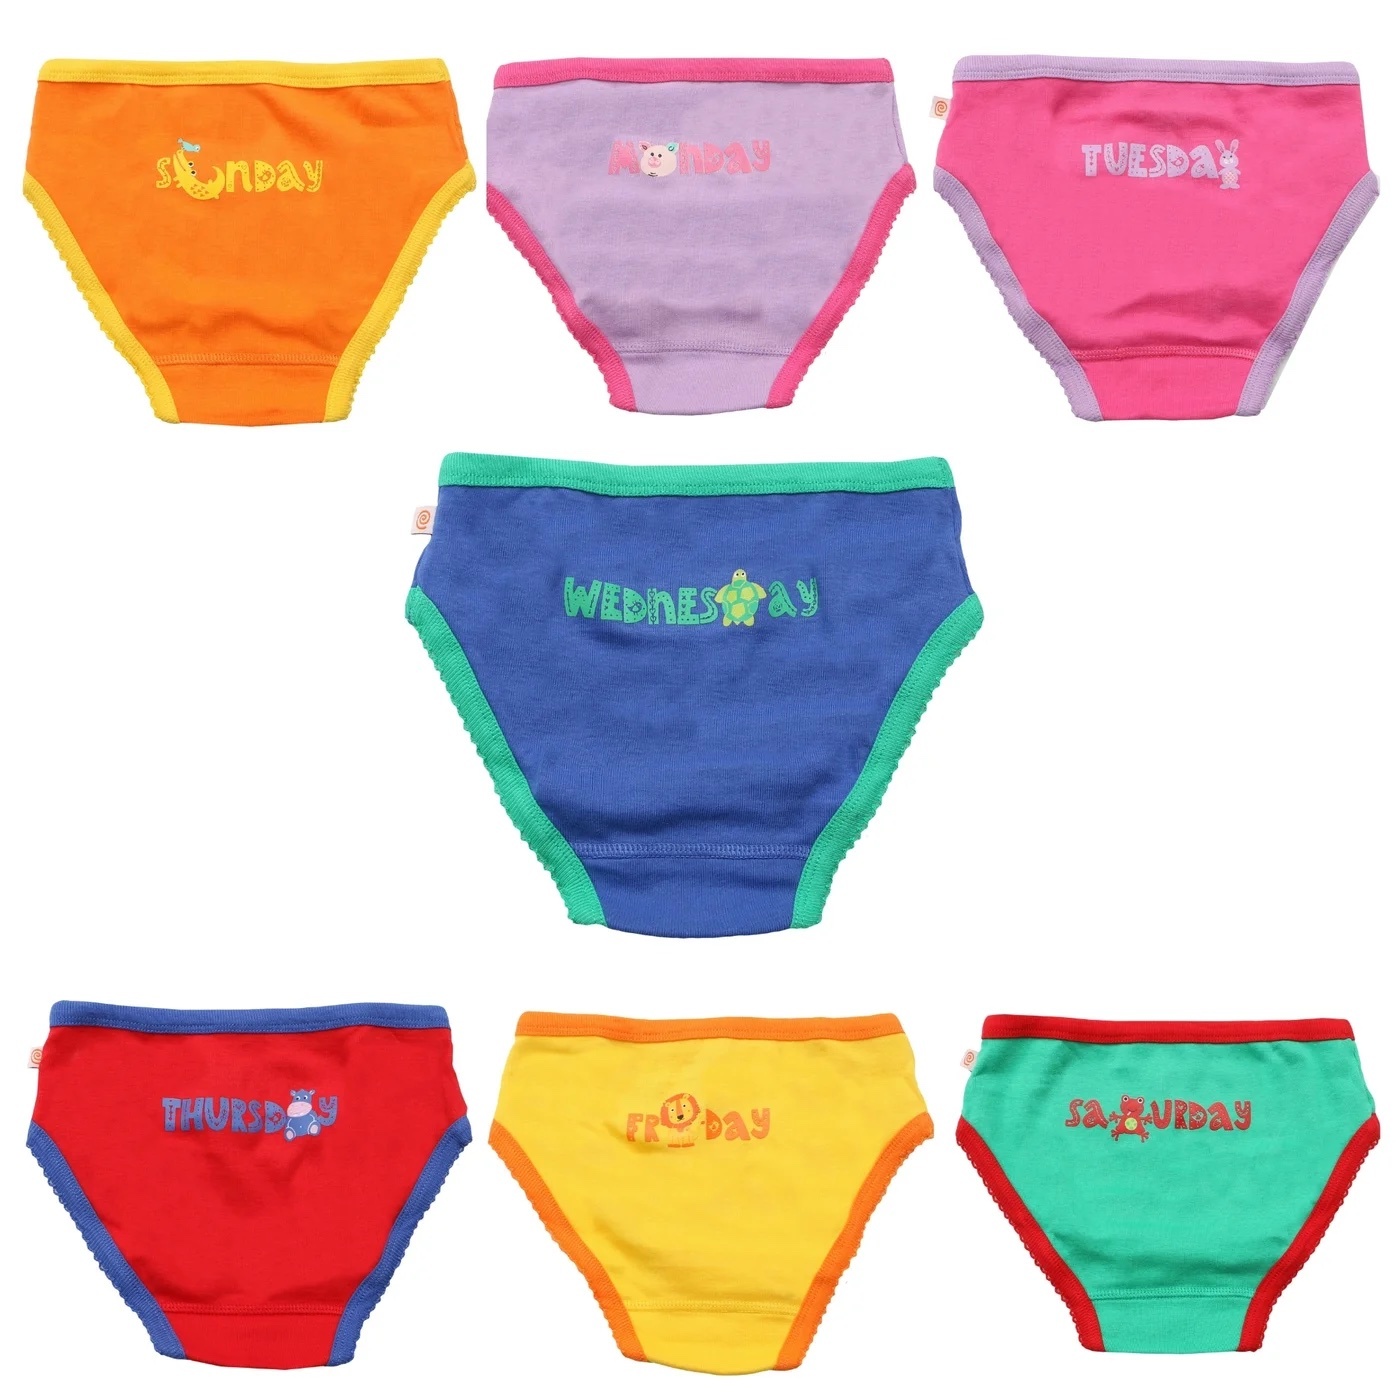 Days of the Week Organic Underwear 3pk - Vancouver's Best Baby